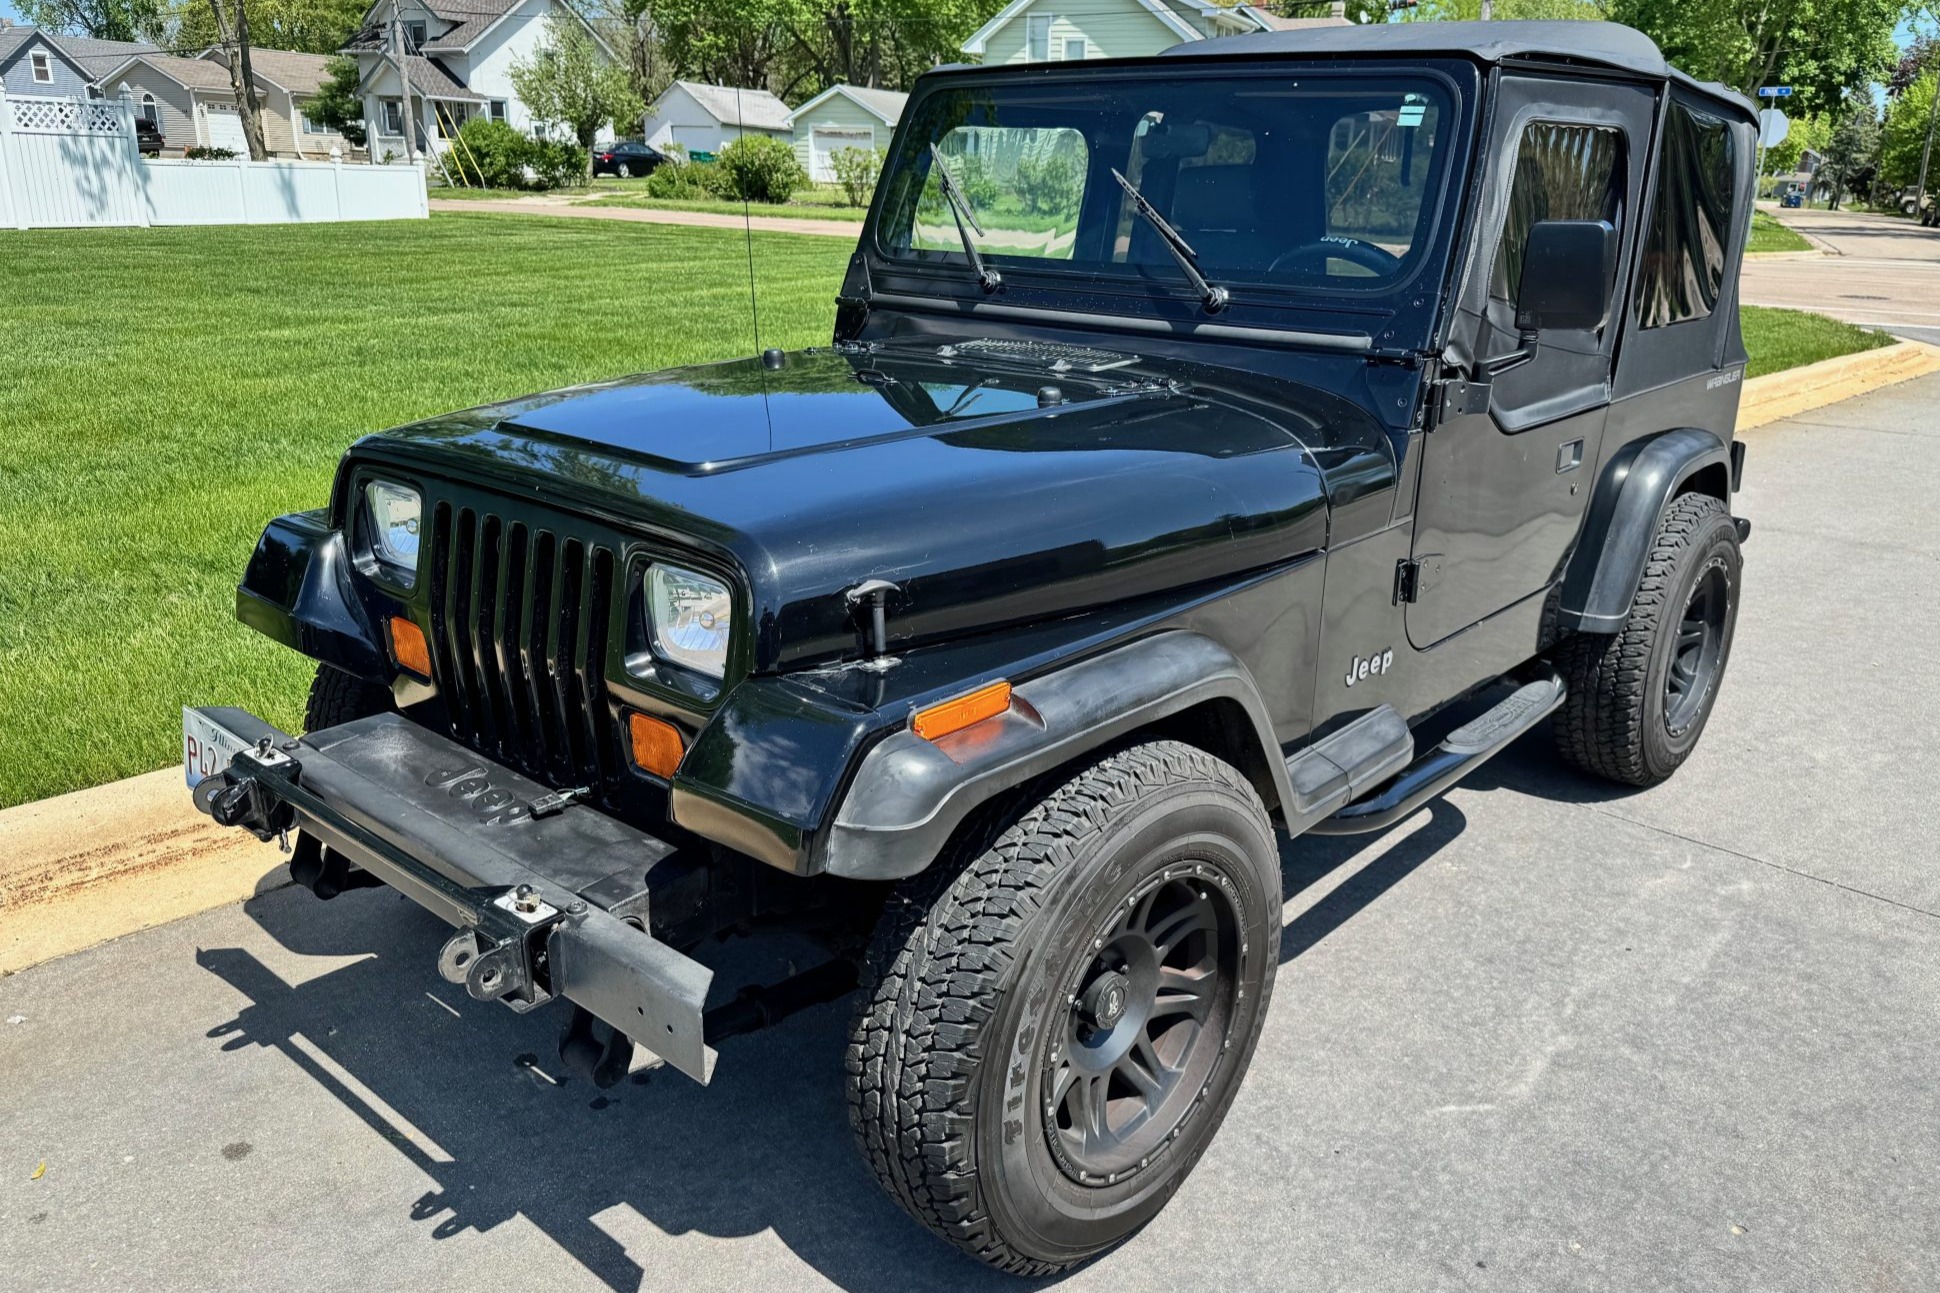 Used 1995 Jeep Wrangler SE 5-Speed Review